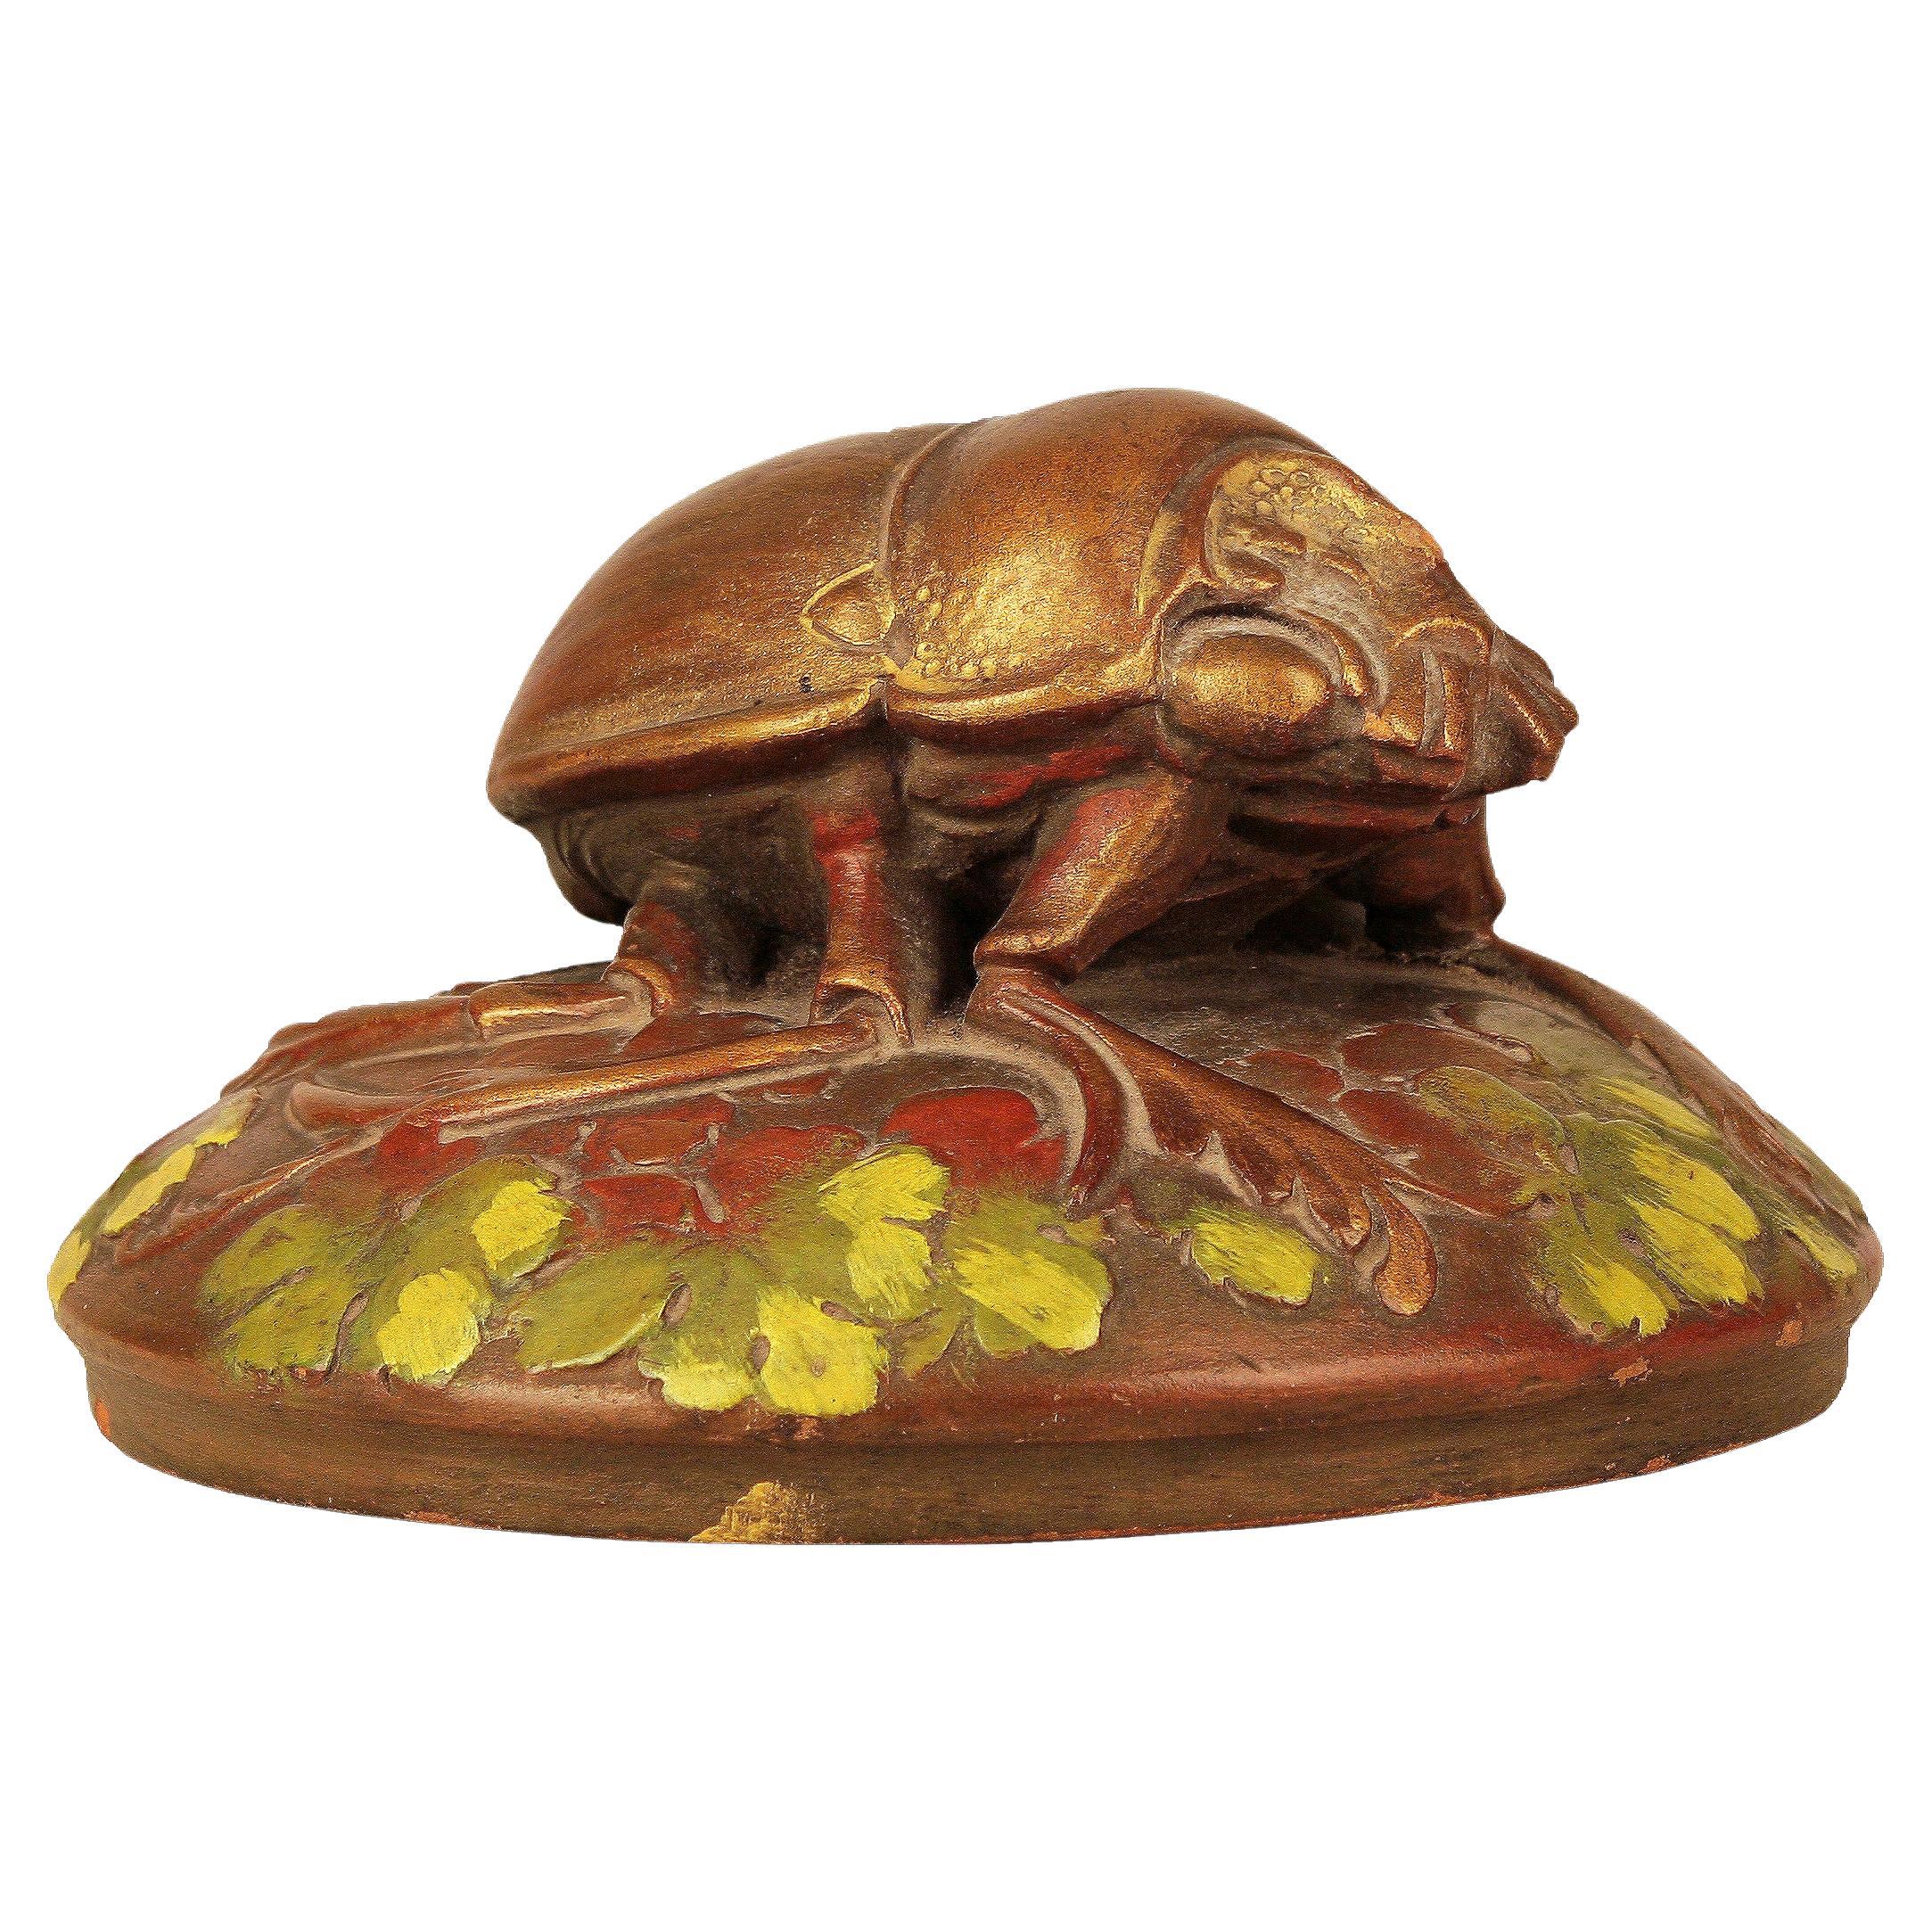 Early 20th Century French Cold-Painted Ceramic Beetle Sculpture by Ernest Dubois For Sale